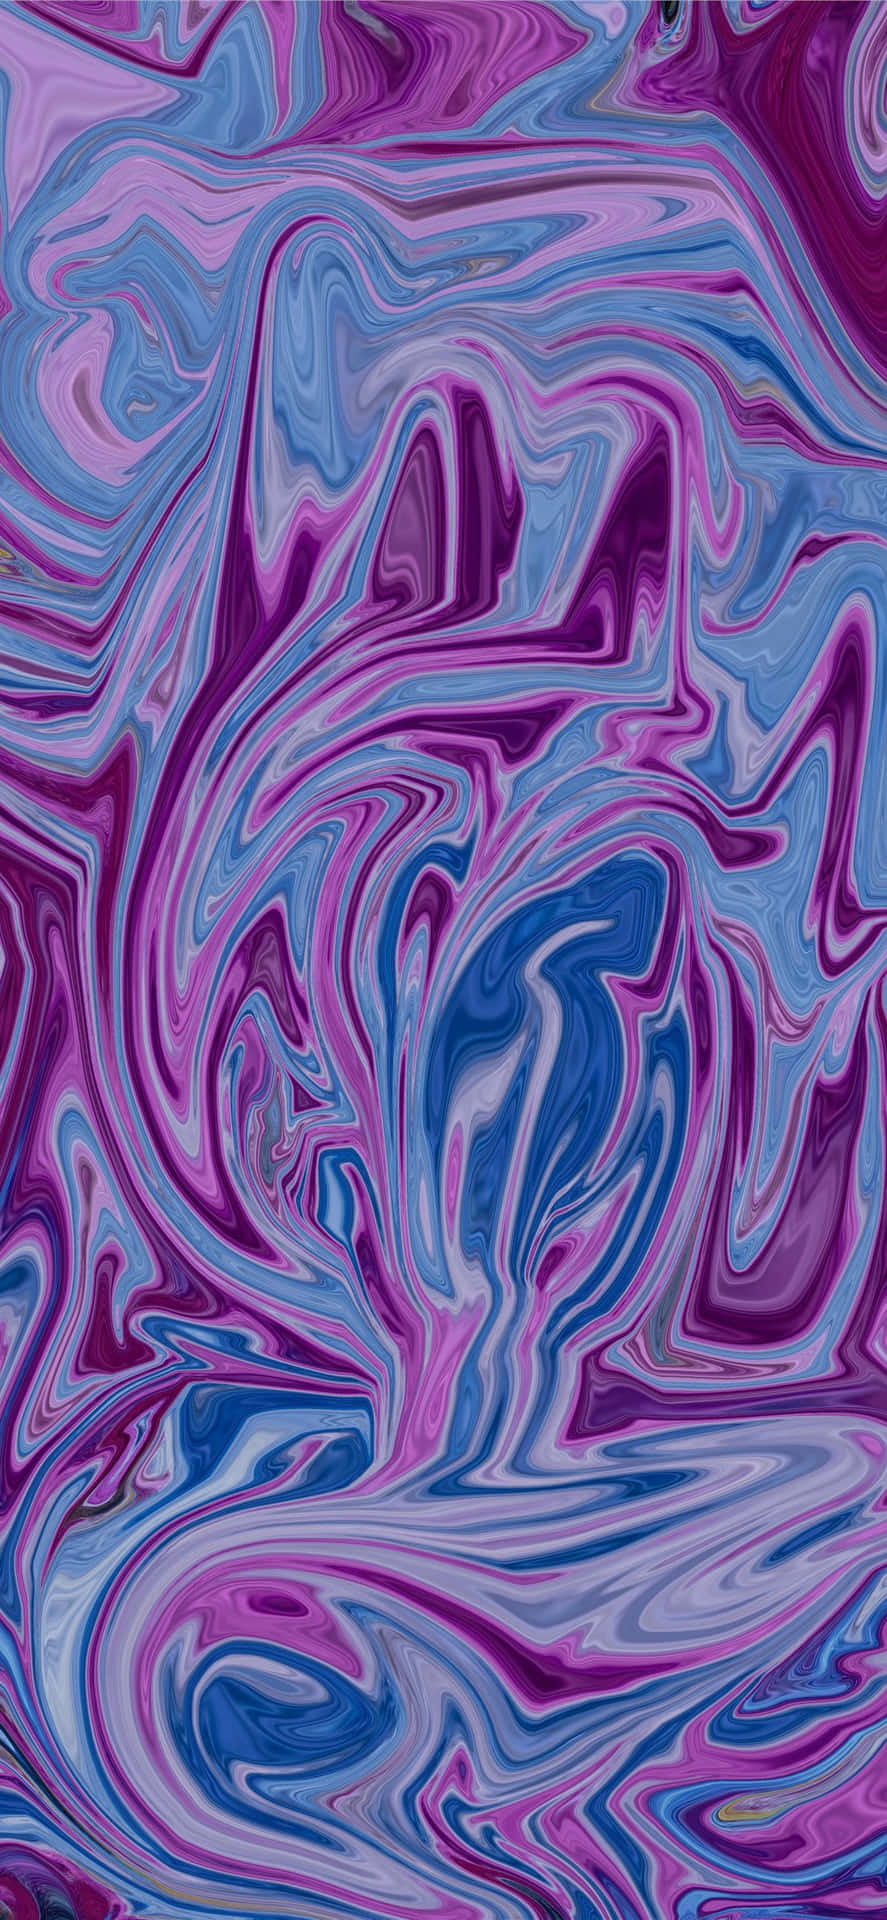 An Intricate and Timeless Purple Abstract Art Piece Wallpaper